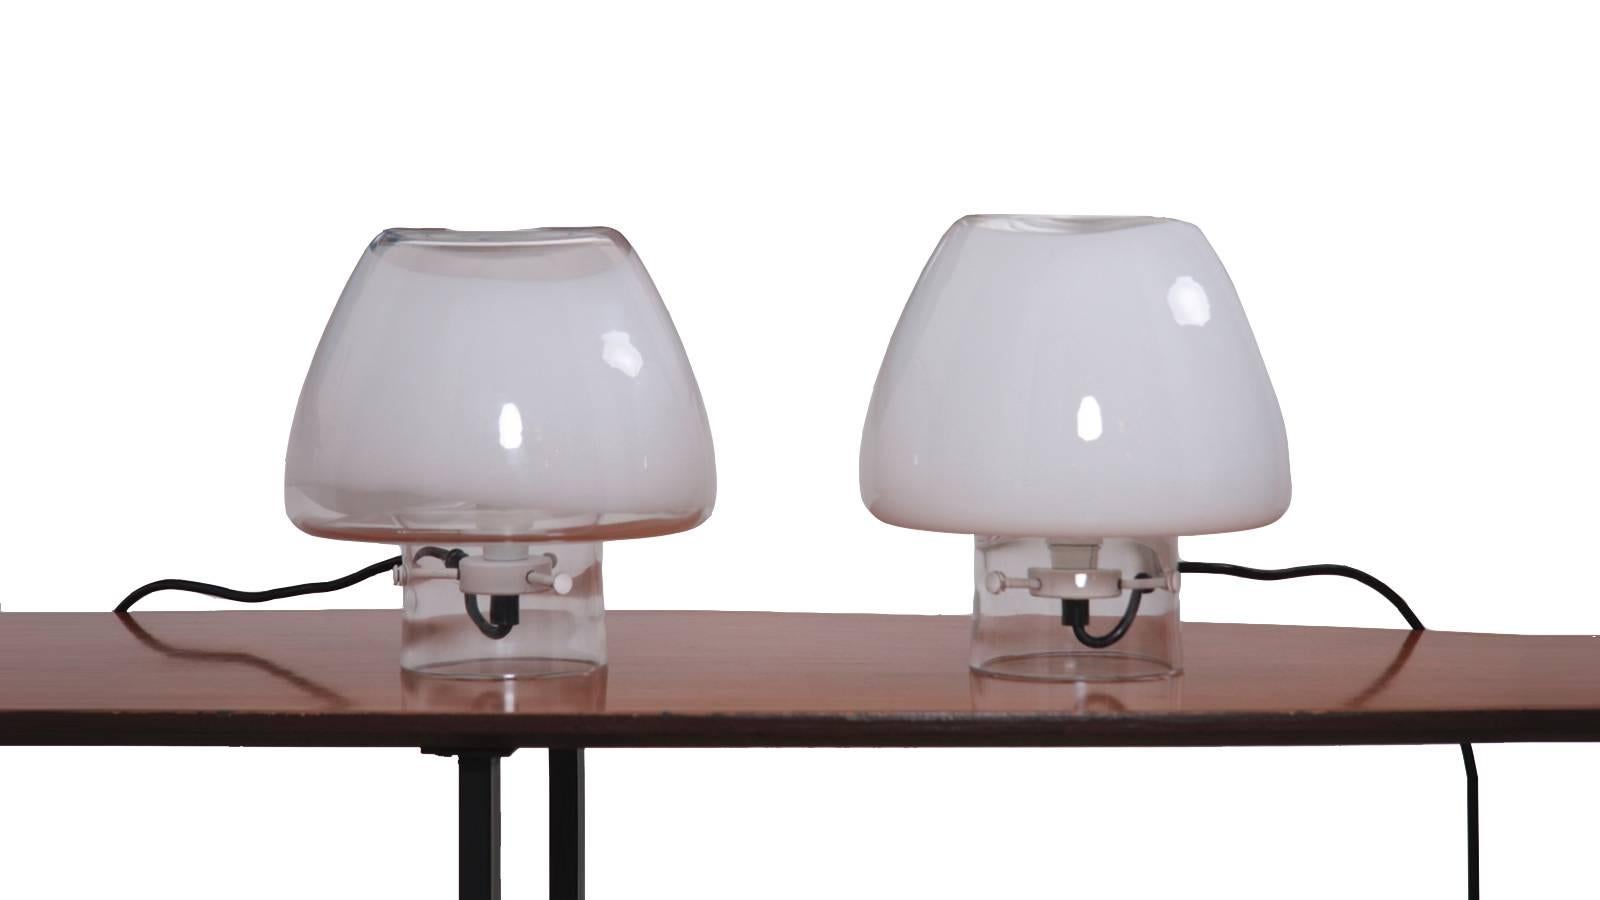 Pair of table lights by Angelo Mangiarotti. This model is no longer in production and highly collectable. Its light is adjustable with dimmer.